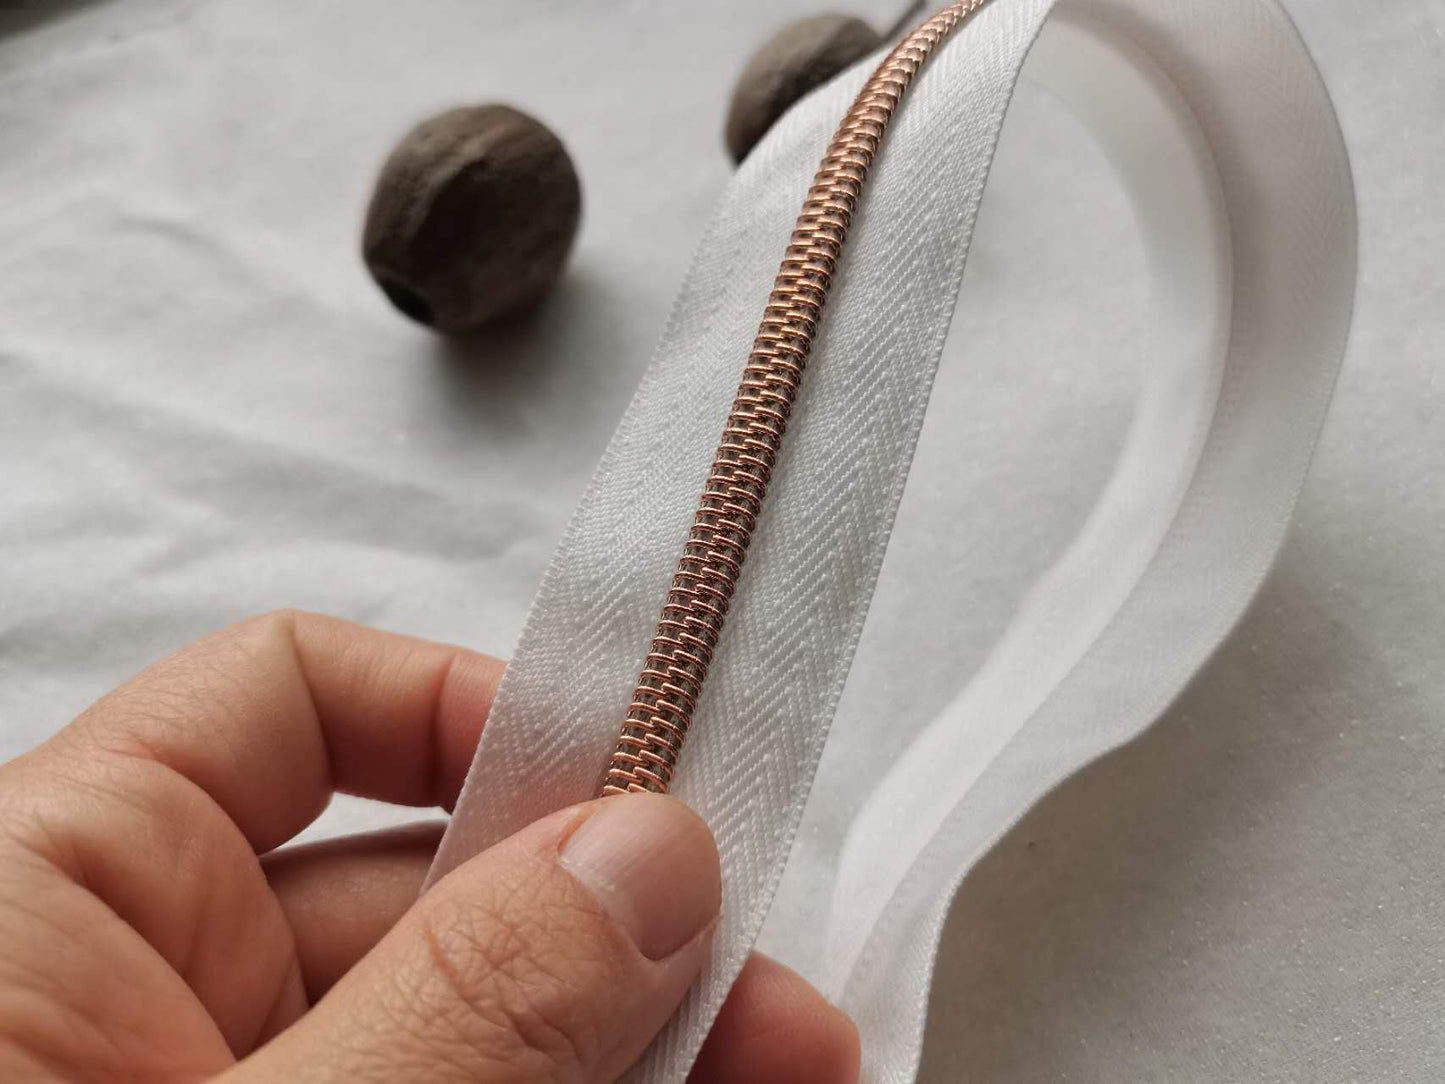 Rose gold teeth size 5 zipper tapes, coil zipper tapes, nylon zipper tapes by the metre